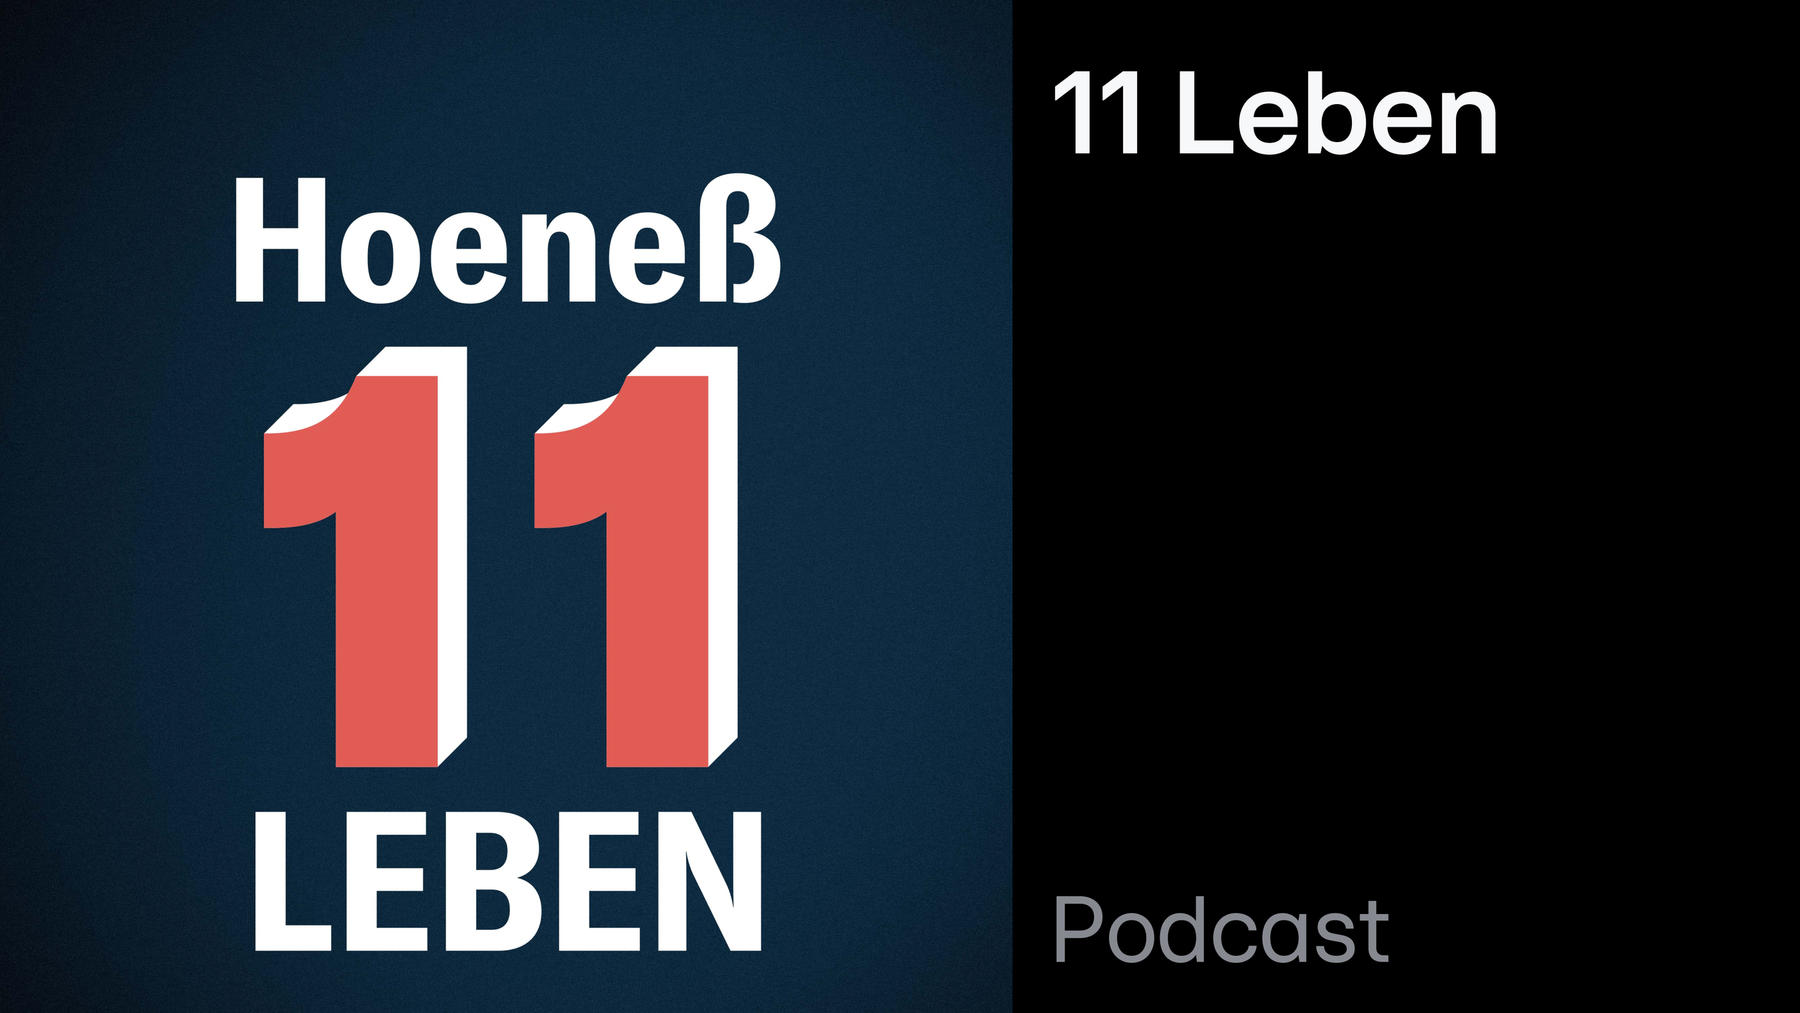 Podcast: Reif ist live